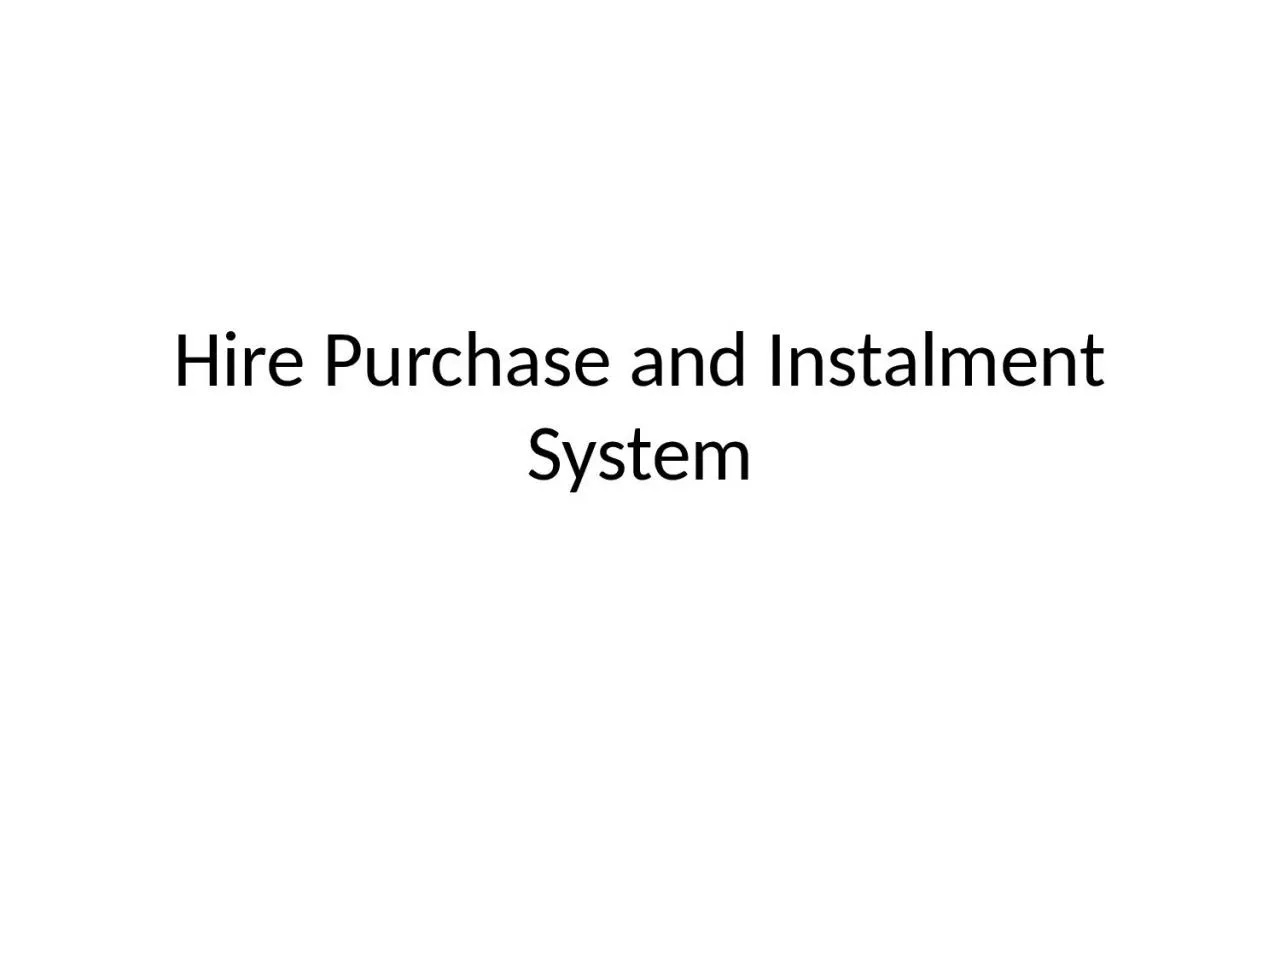 Hire Purchase and Instalment System